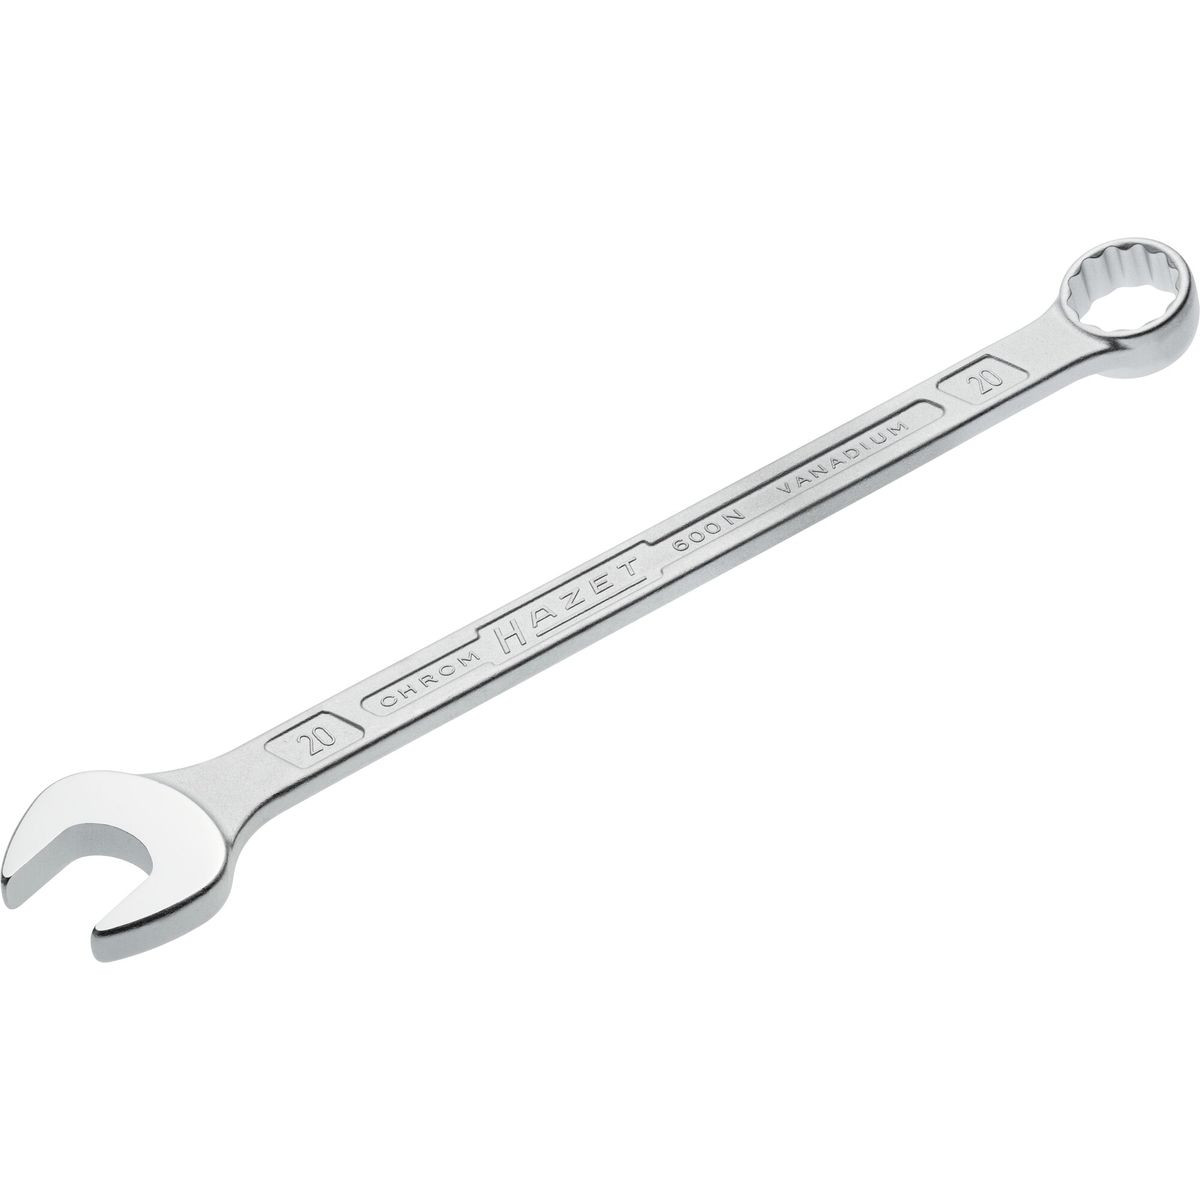 Combination Wrench No.600N-20 Hazet®